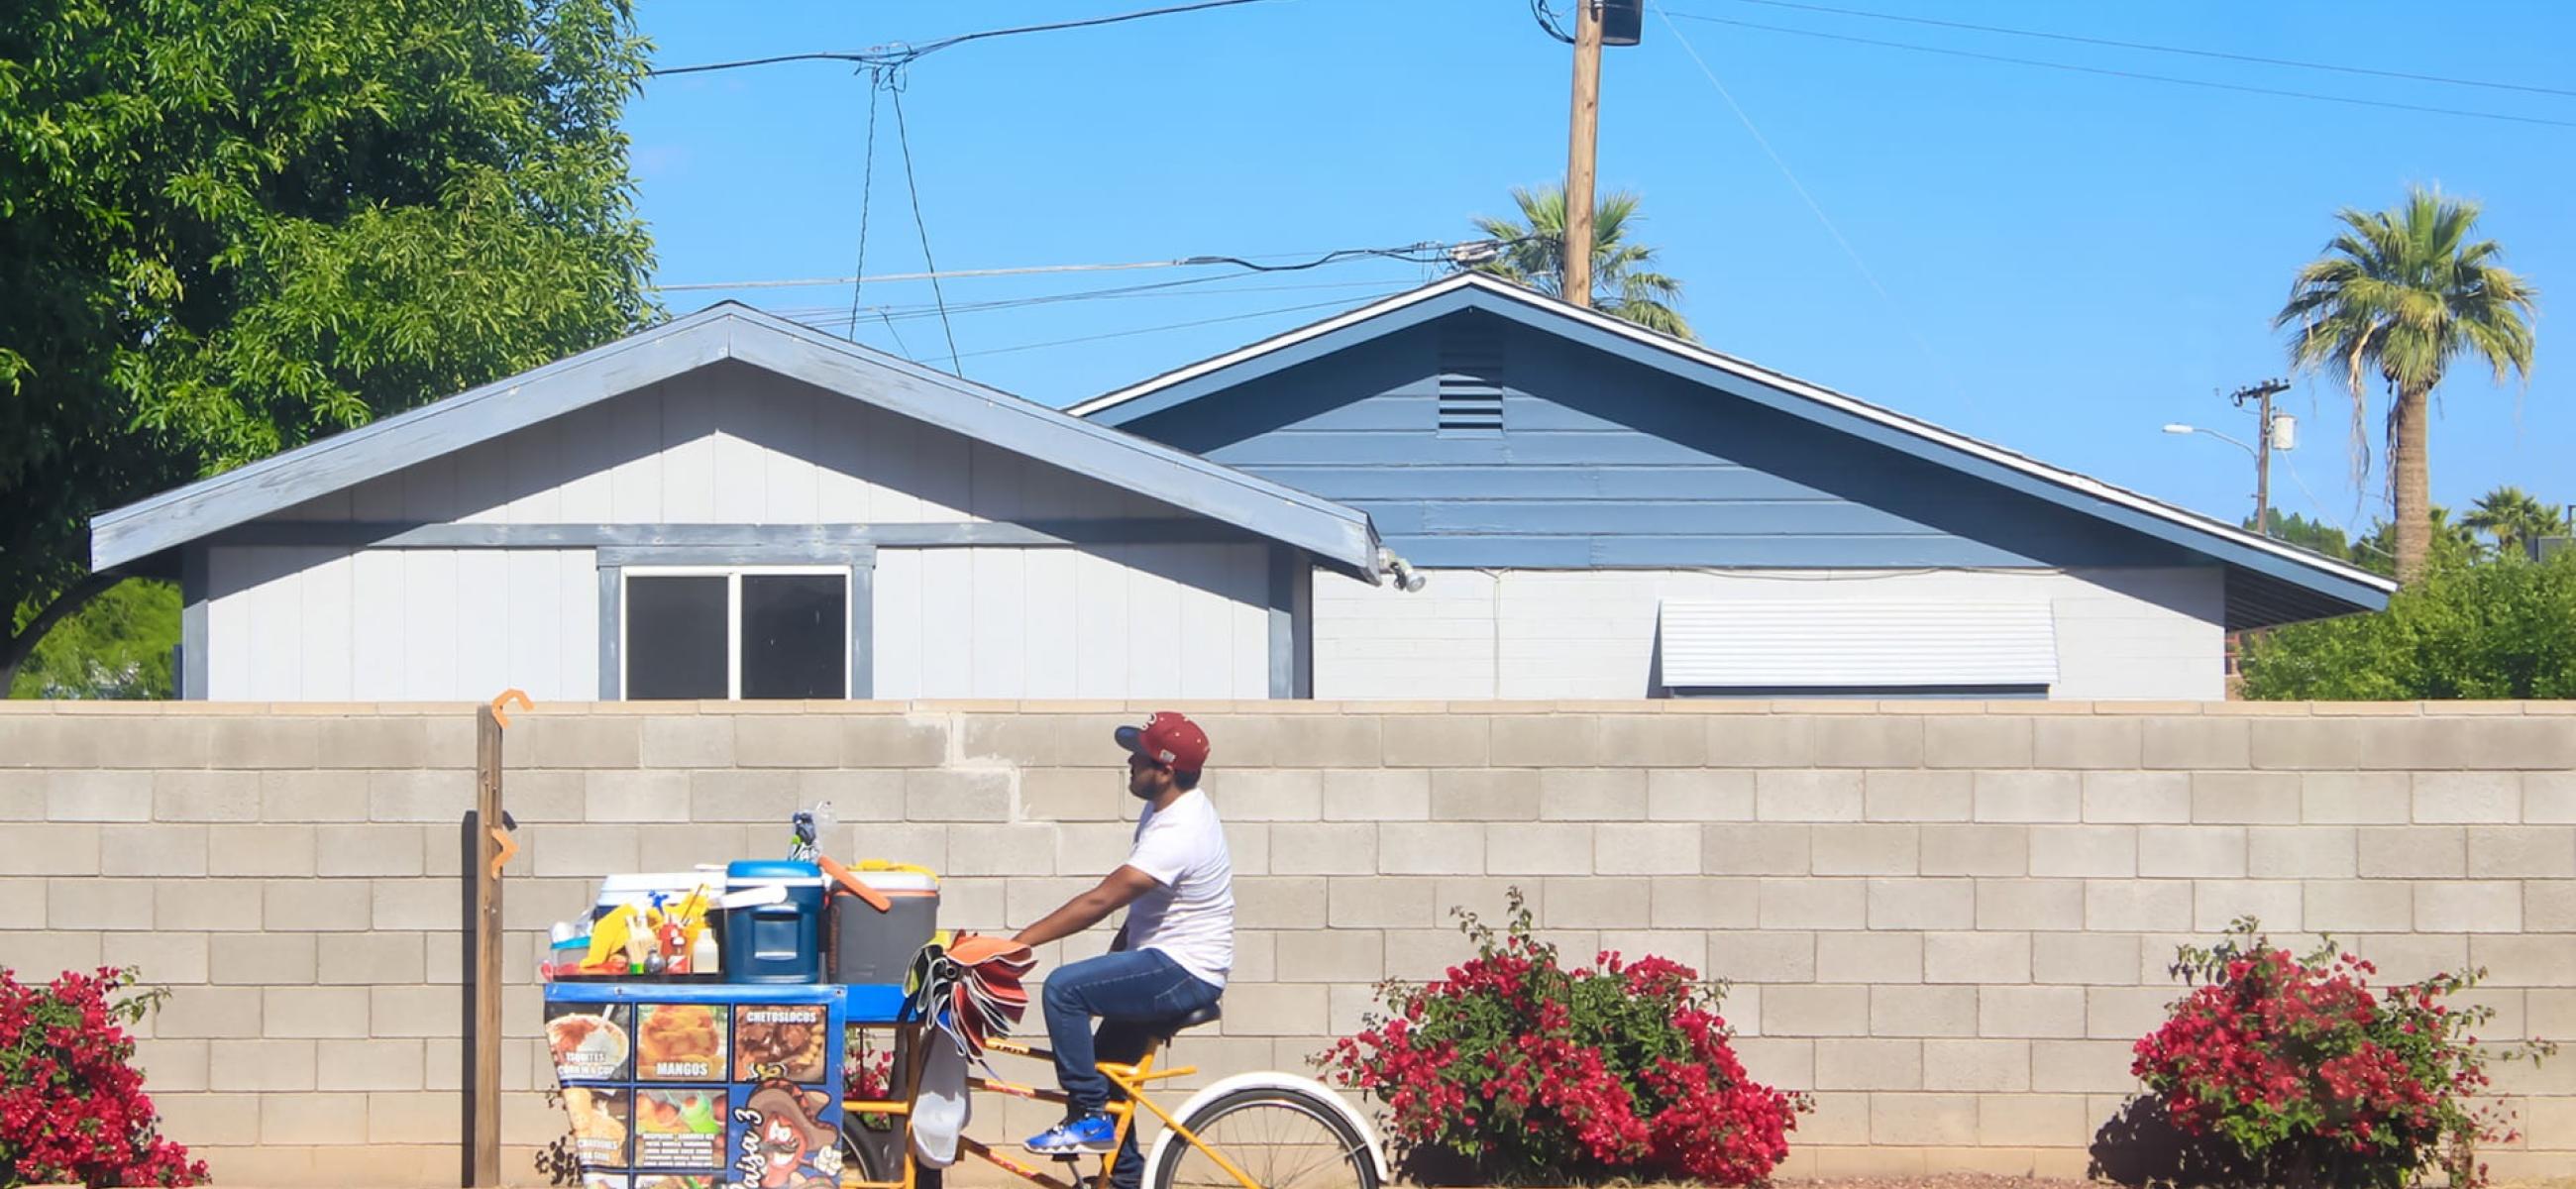 A person cycling past a house with a full cart on the front of the bike, almost as big as the bike